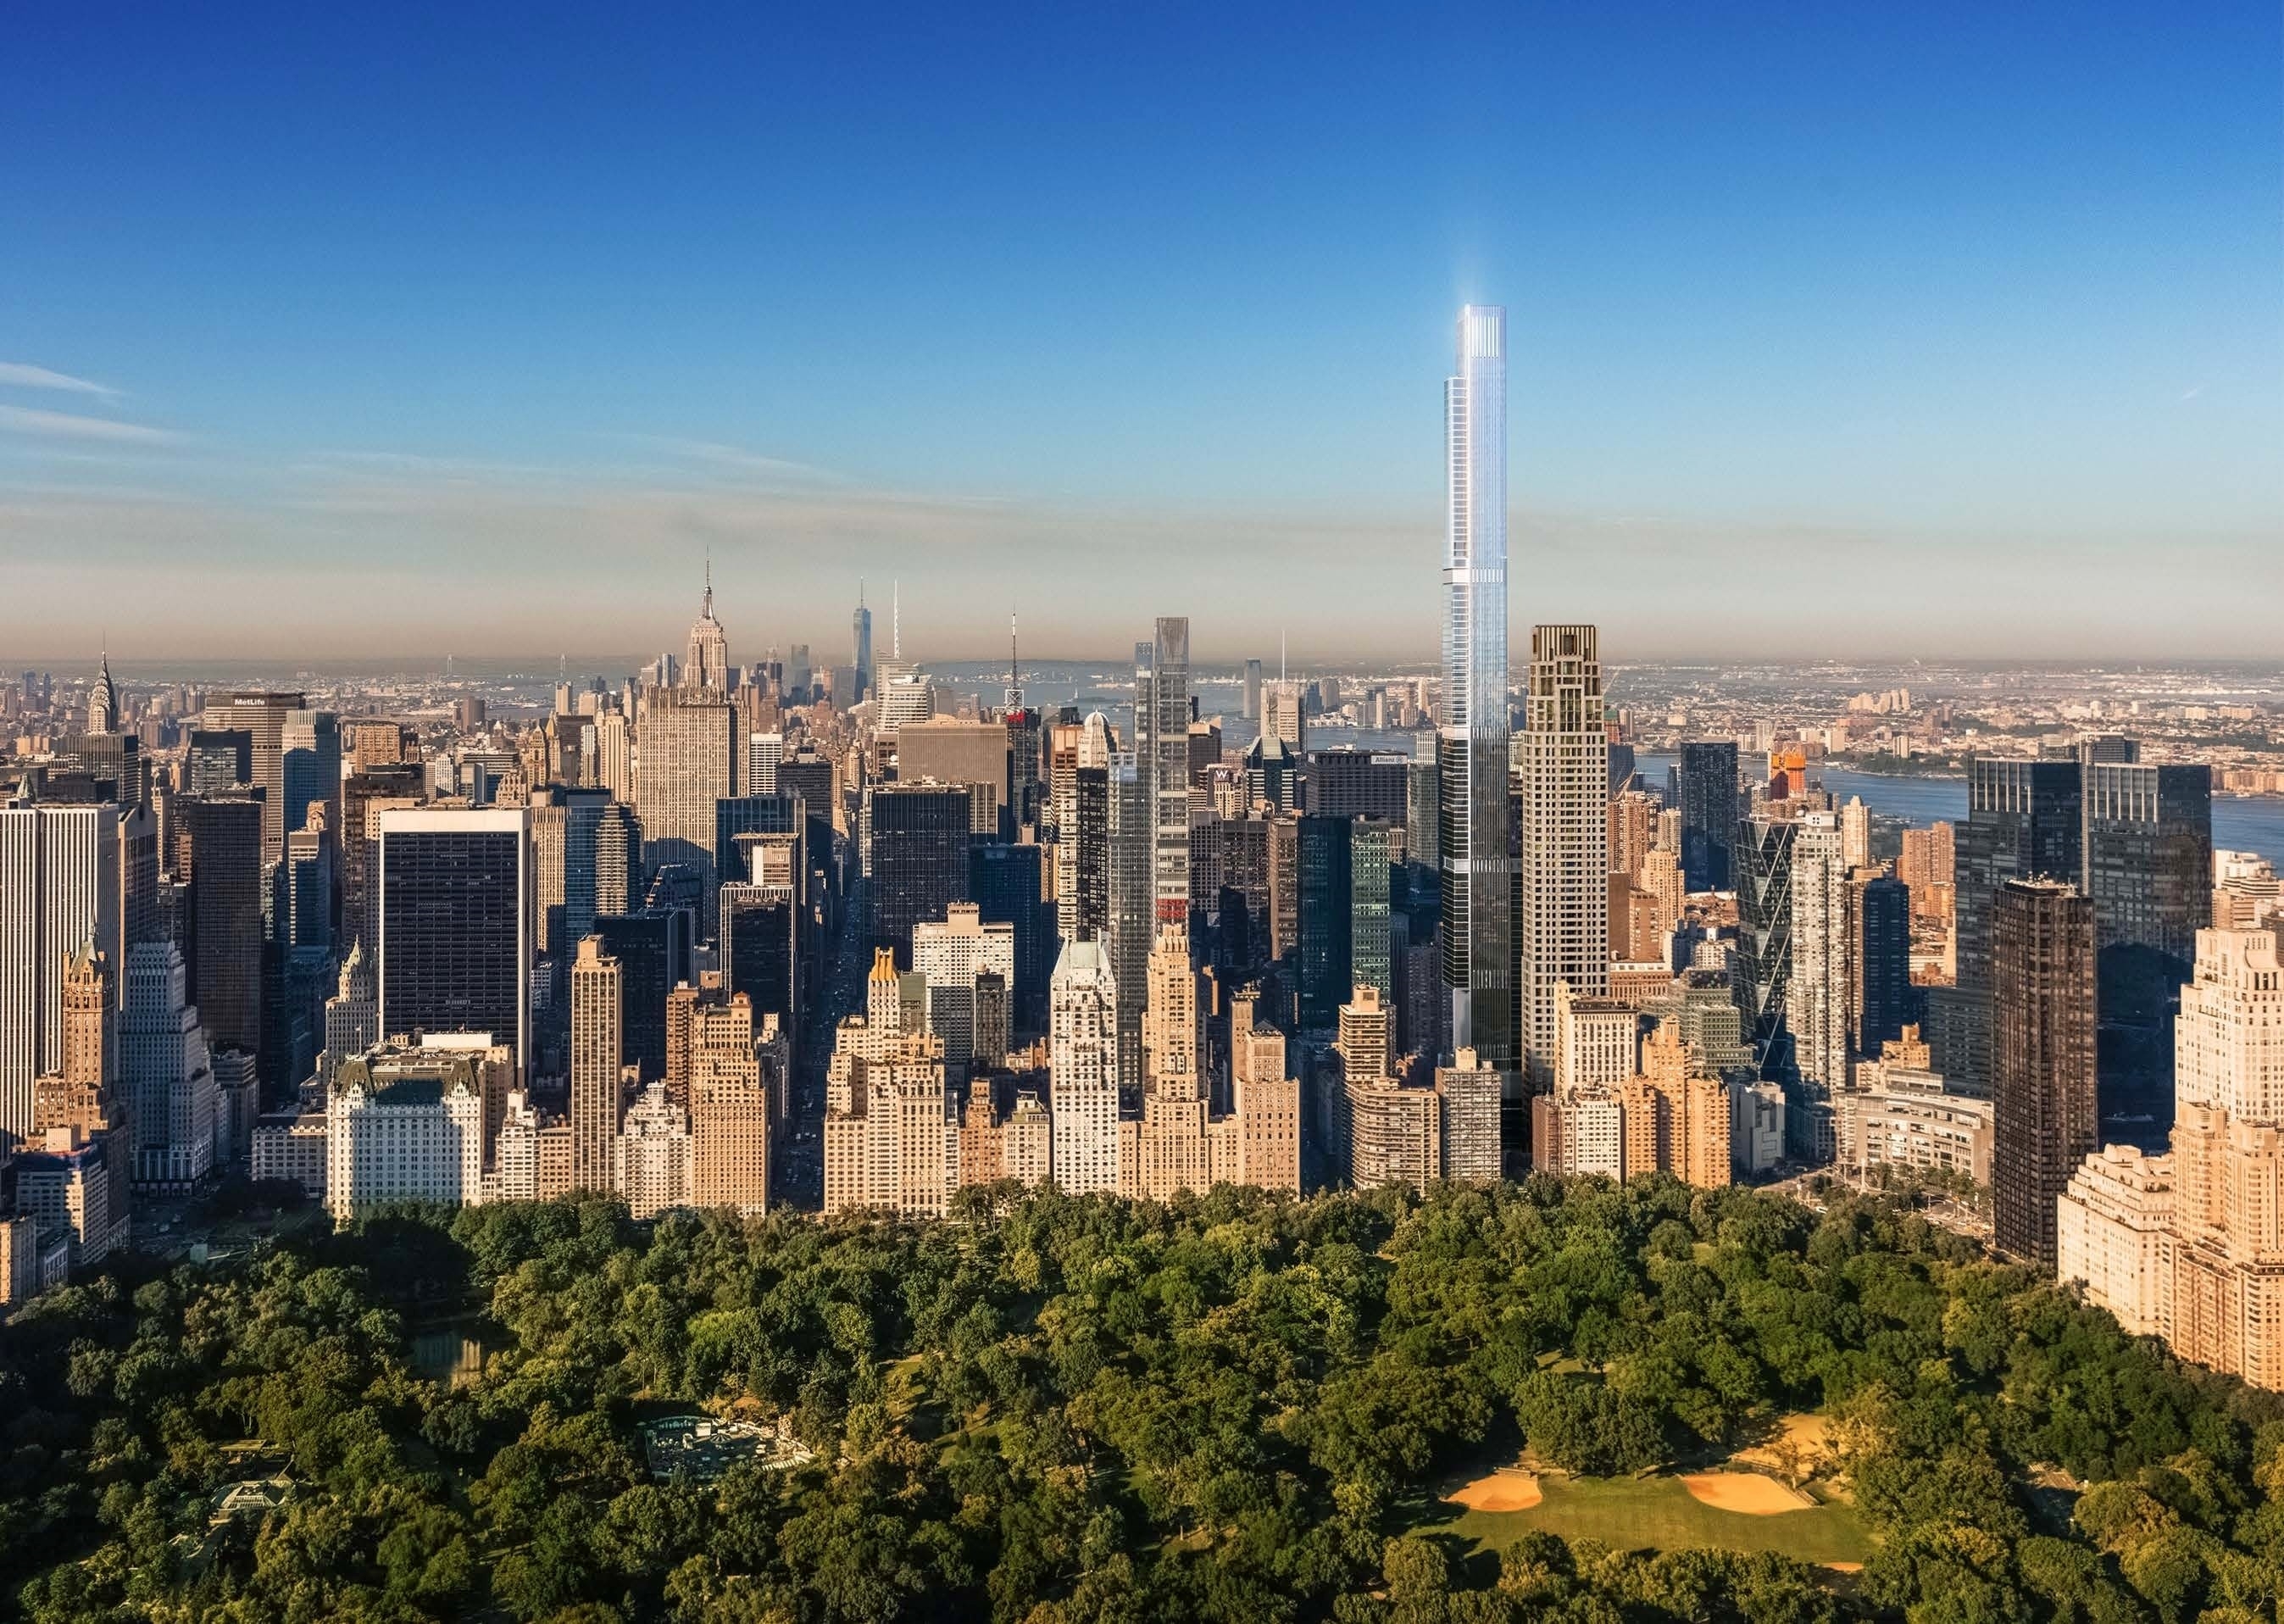 Condominium for Sale at Central Park Tower, 217 W 57TH ST, 61N Midtown West, New York, New York 10019